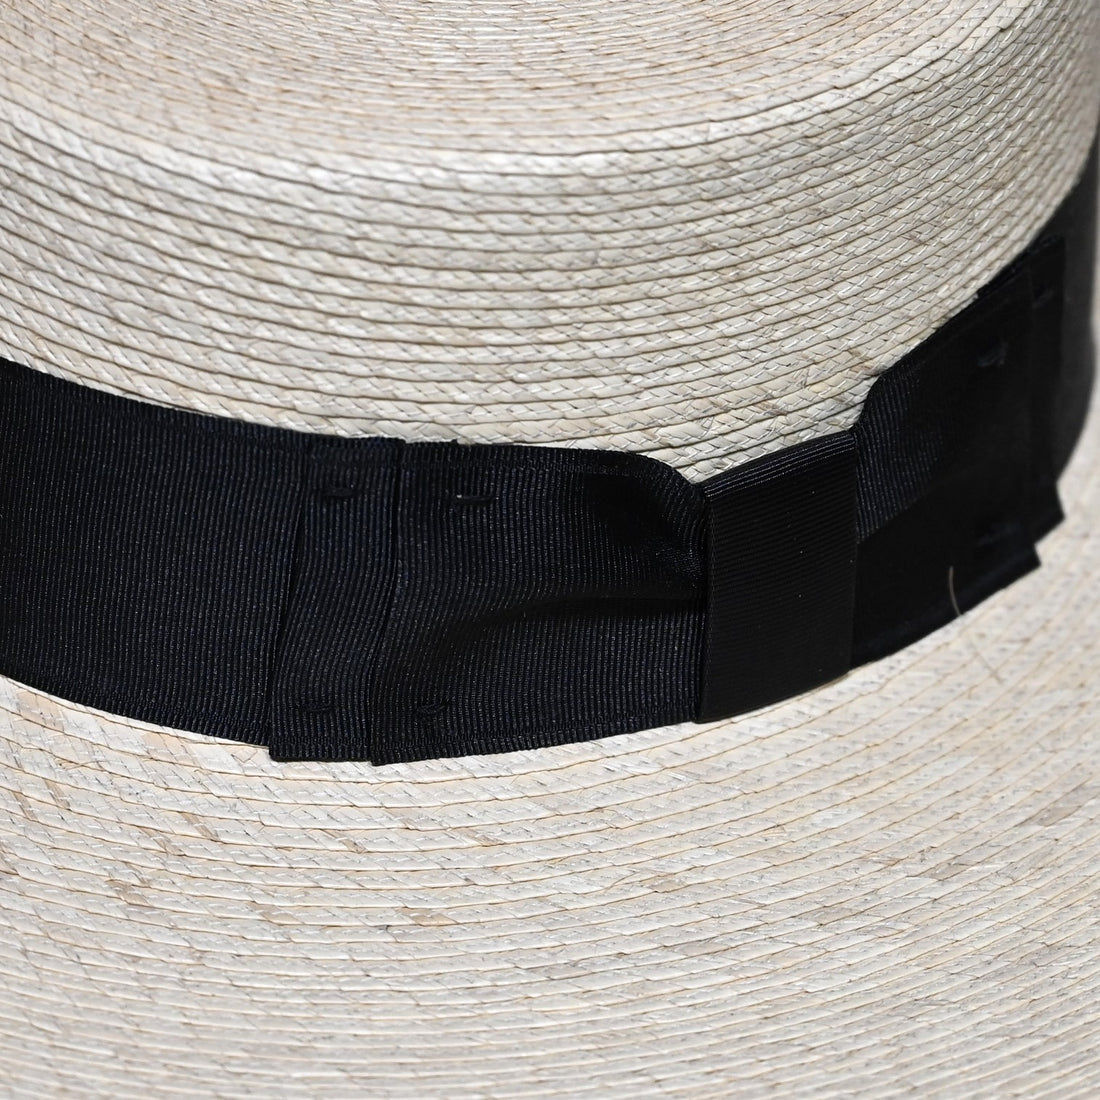 Stetson The Sunny Palm Wide Brim Hat view of detail